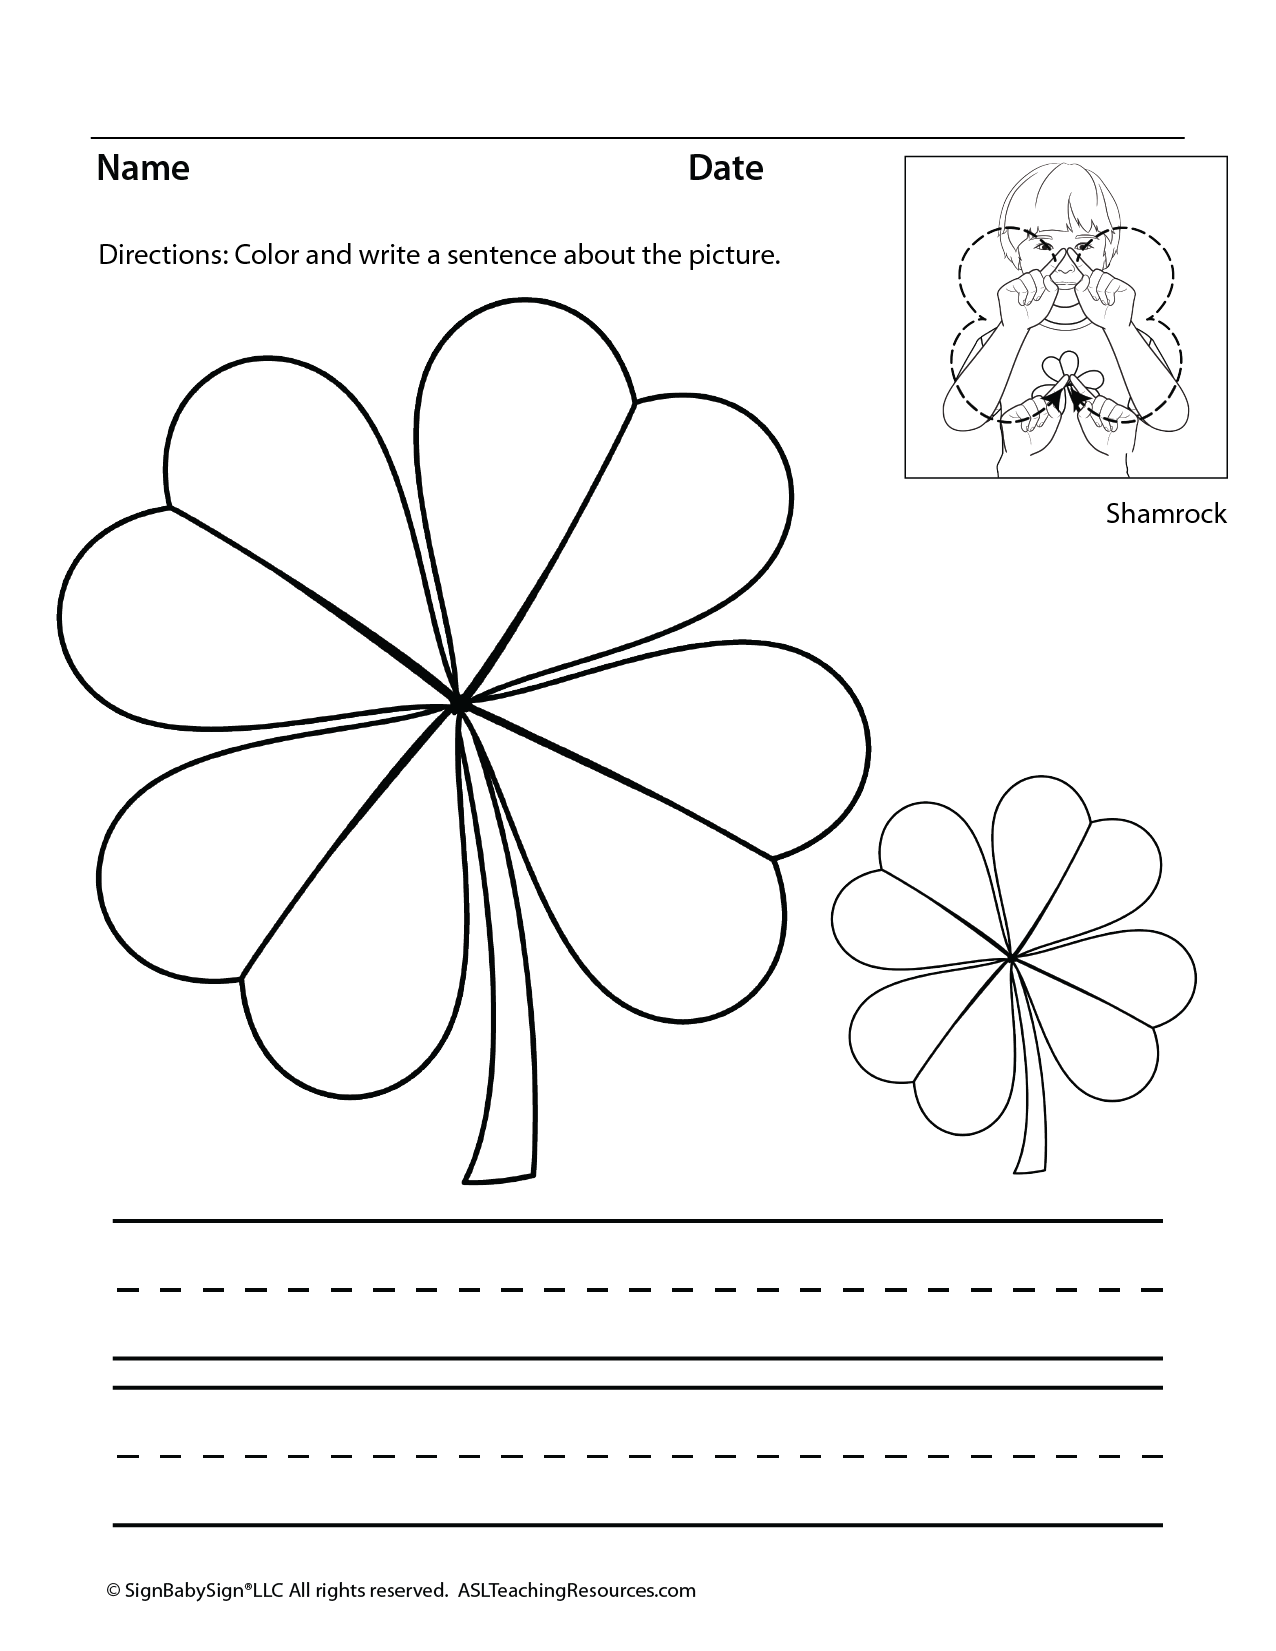 St. Patrick's Day Coloring Pages ASL - ASL Teaching Resources